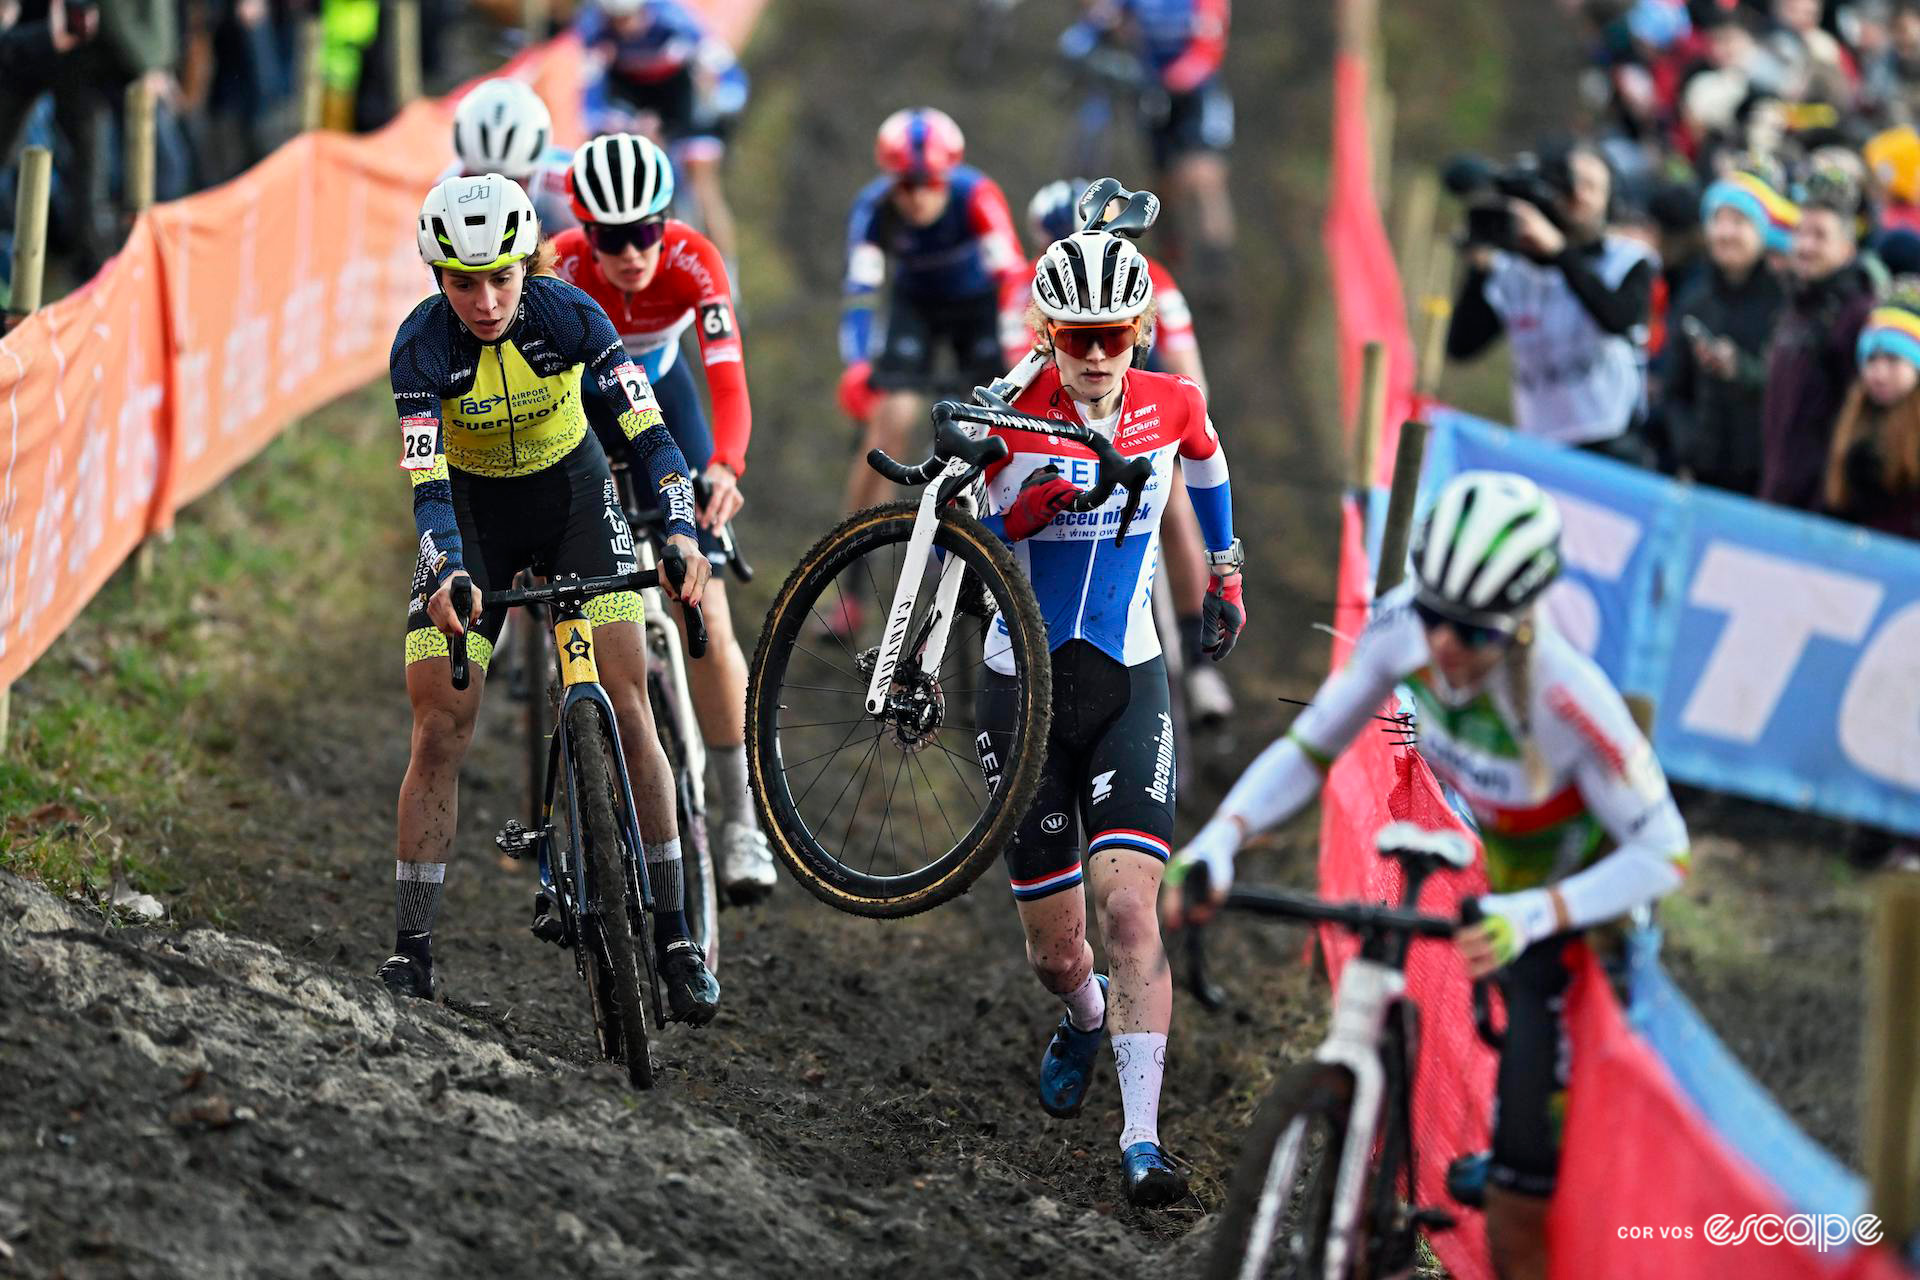 Some of the top elite women during Cyclocross World Cup Namur, including Puck Pieterse, Sara Casasola and Marie Schreiber.